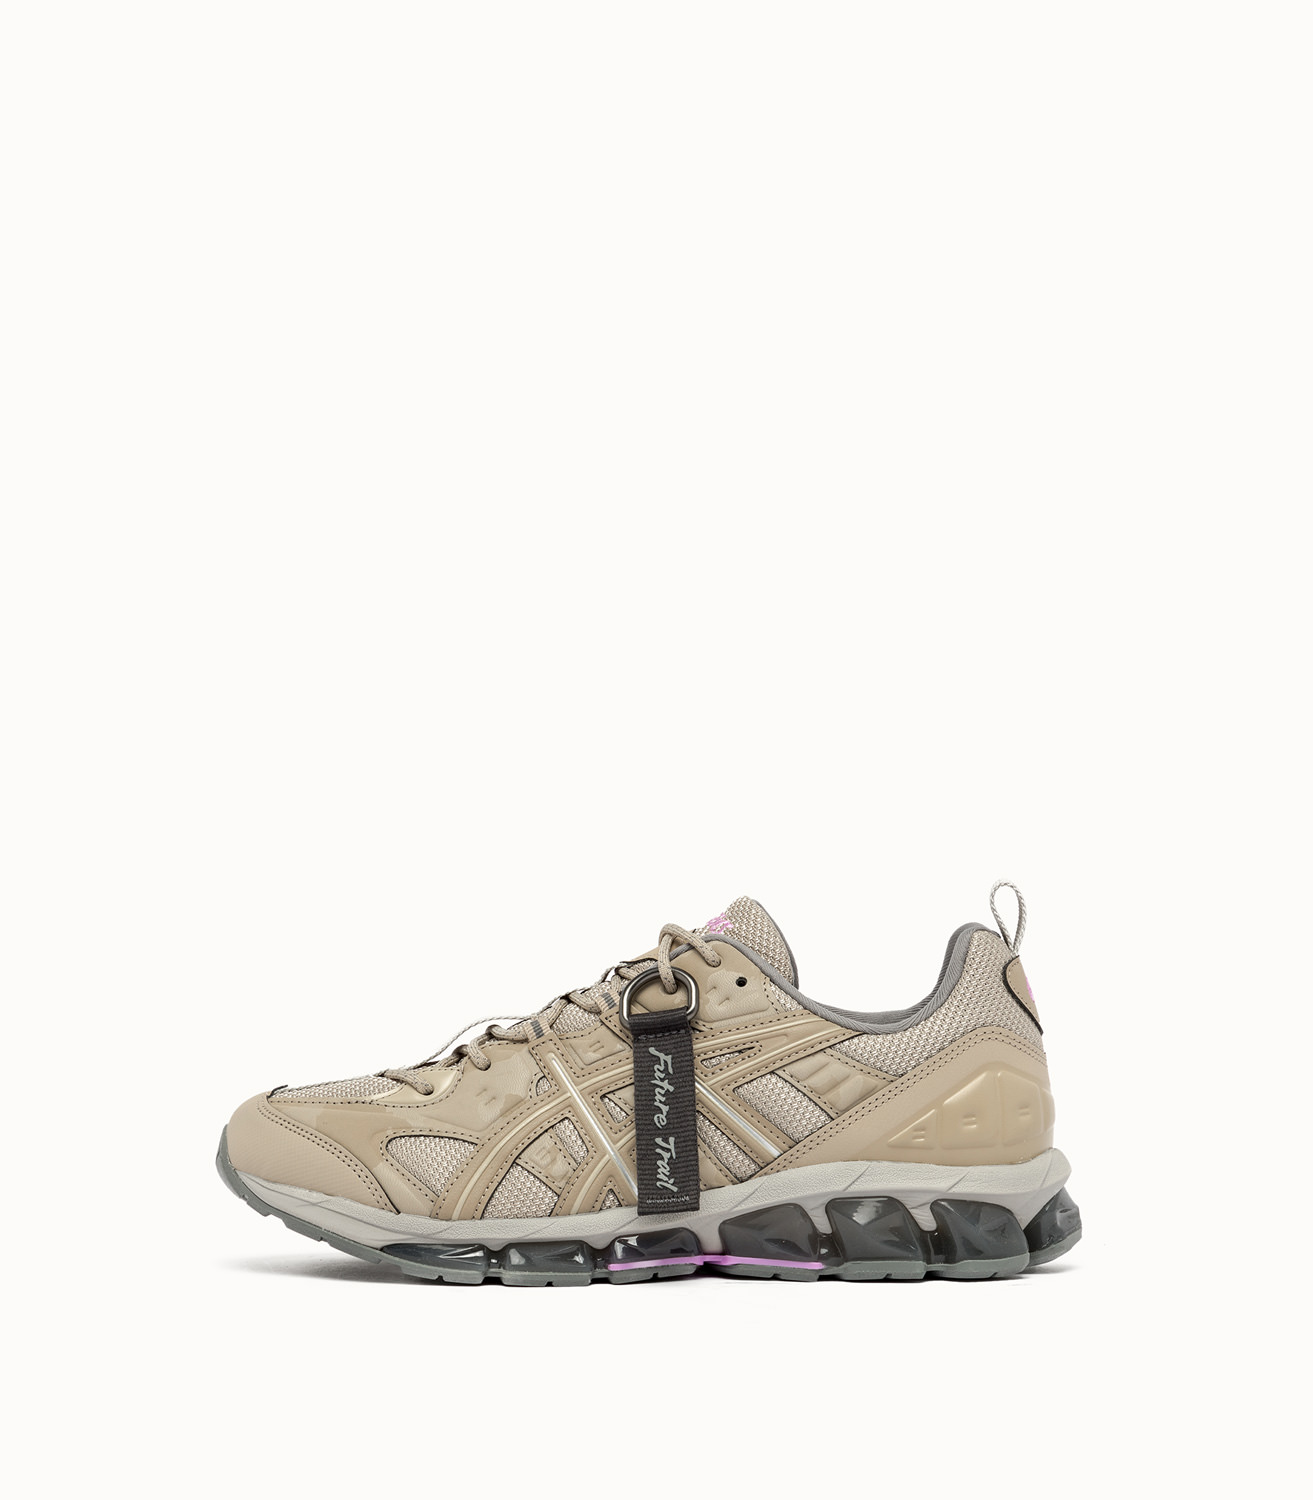 ASICS 360 VII KISO SNEAKERS COLOR BEIGE Playground